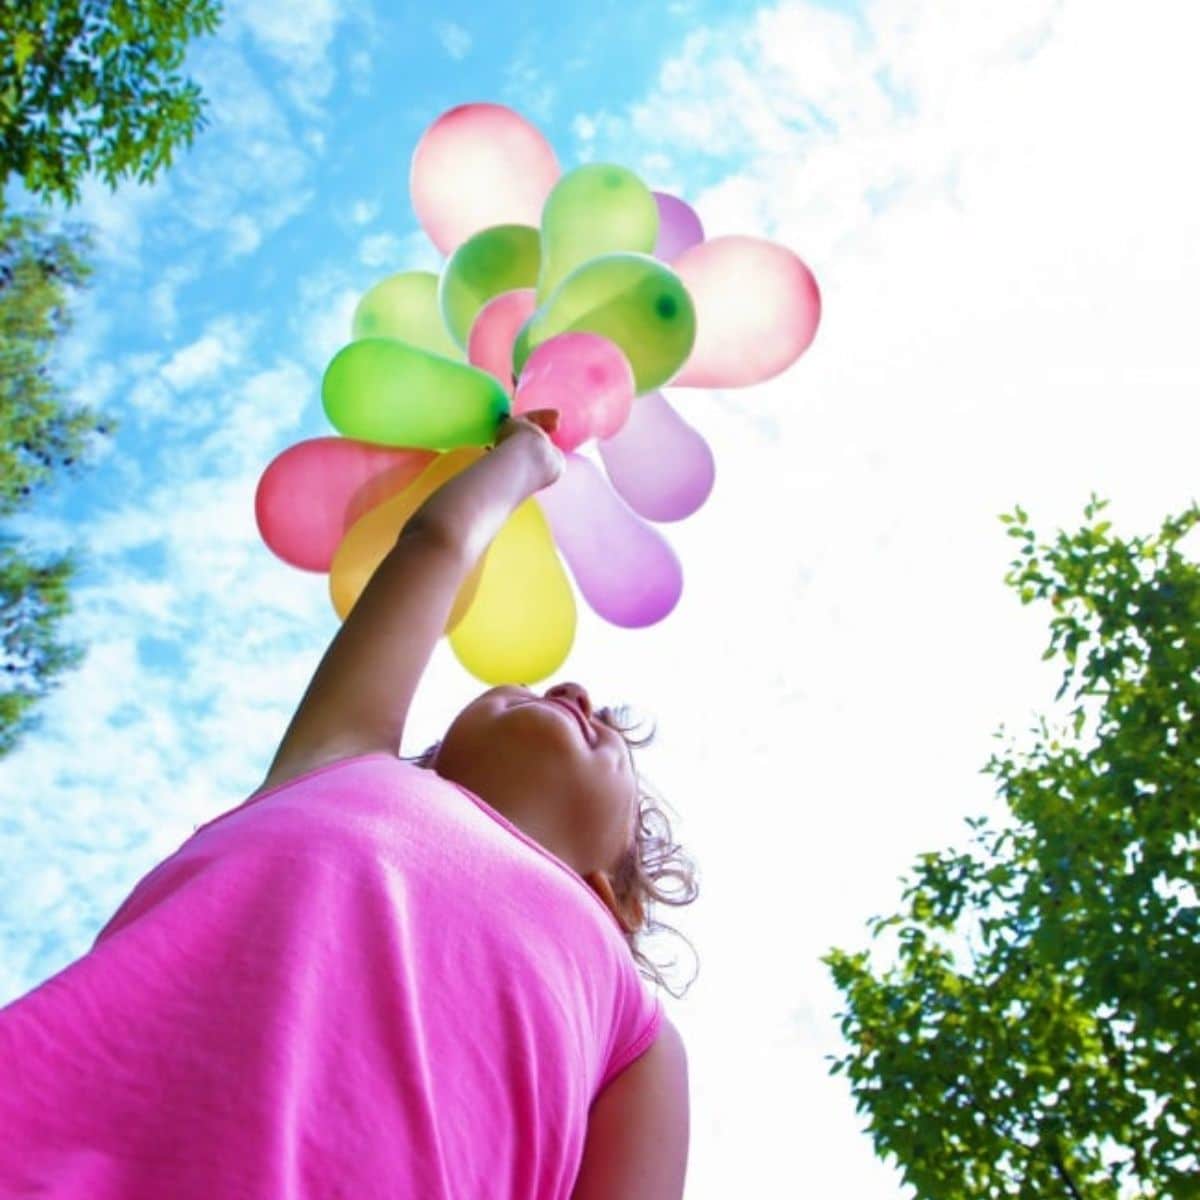 Young girl in pink dress holding balloons.